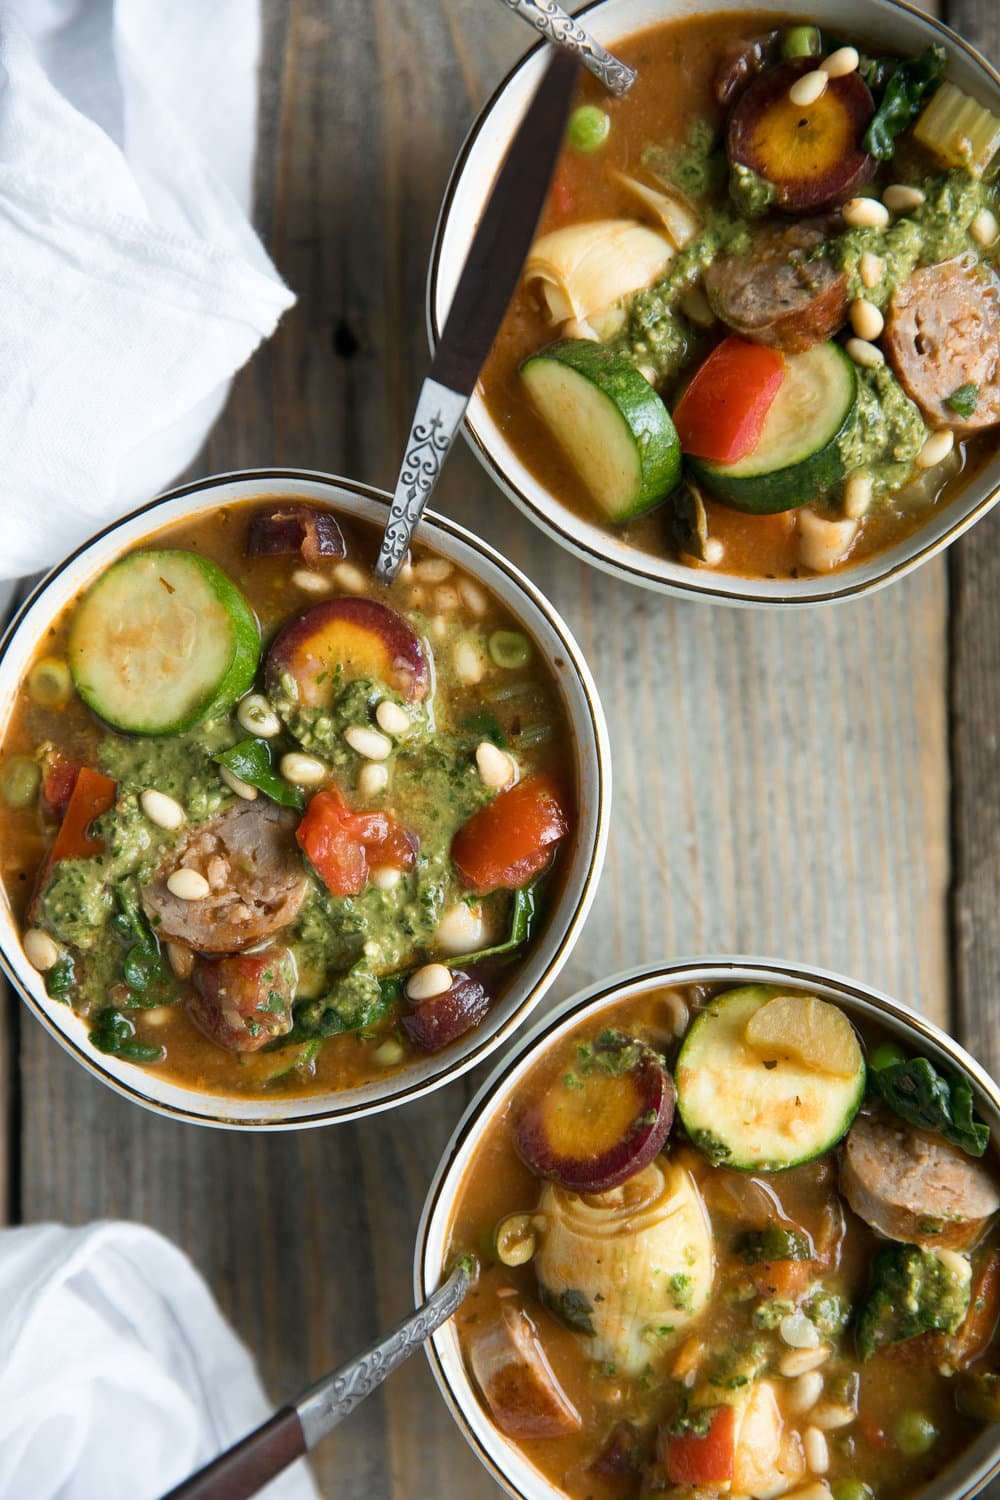 Sausage and Vegetable Soup with Easy Basil Pesto. Filled with fresh vegetables and juicy sausage, this delicious and colorful Sausage and Vegetable Soup is topped with Easy Basil Pesto.